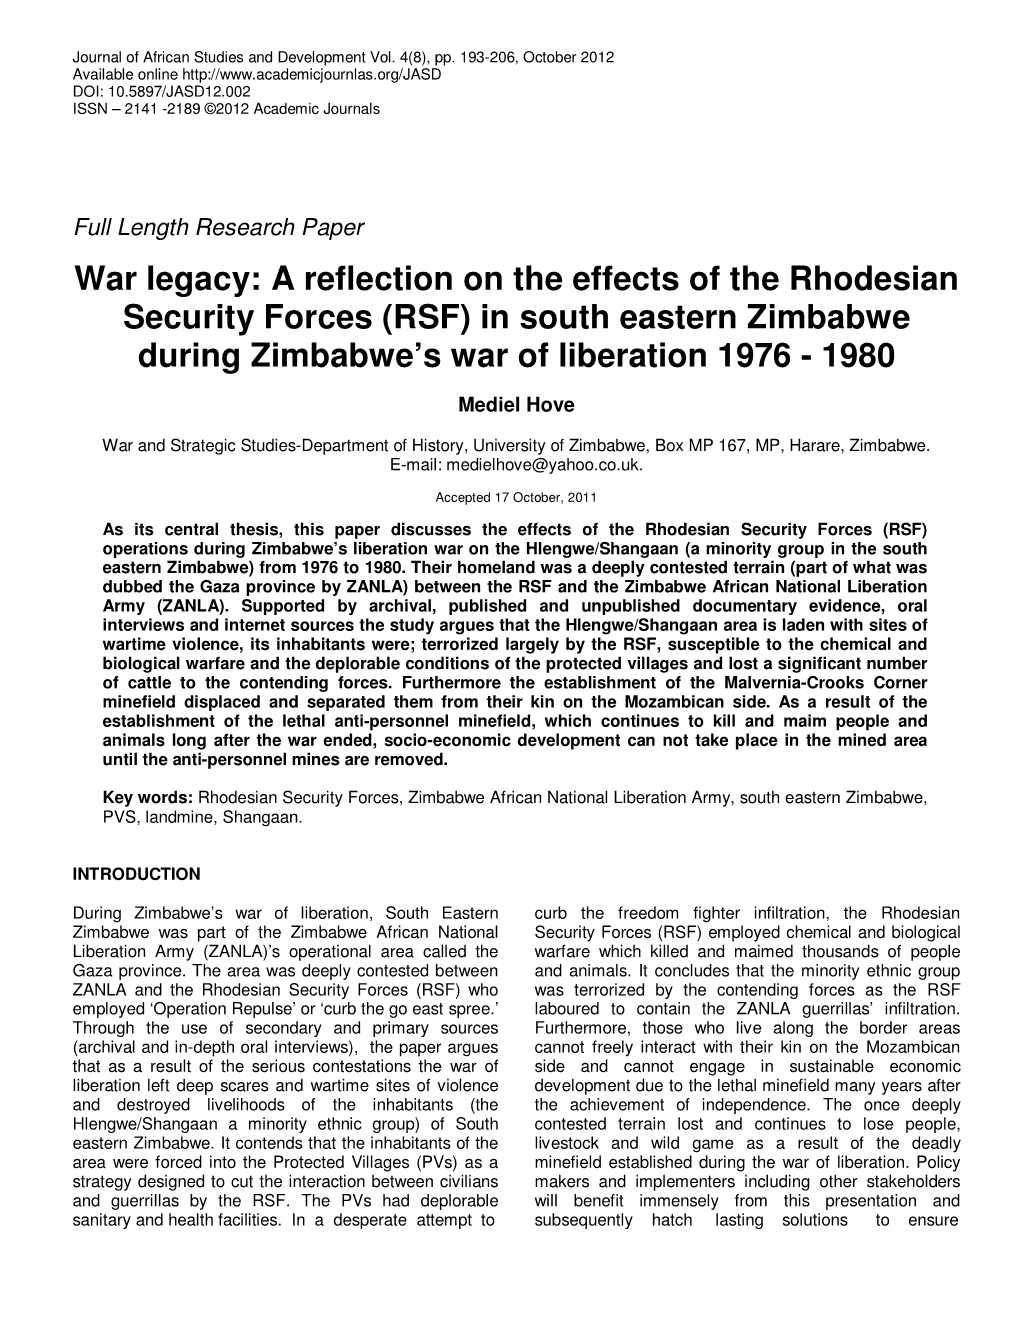 A Reflection on the Effects of the Rhodesian Security Forces (RSF) in South Eastern Zimbabwe During Zimbabwe’S War of Liberation 1976 - 1980